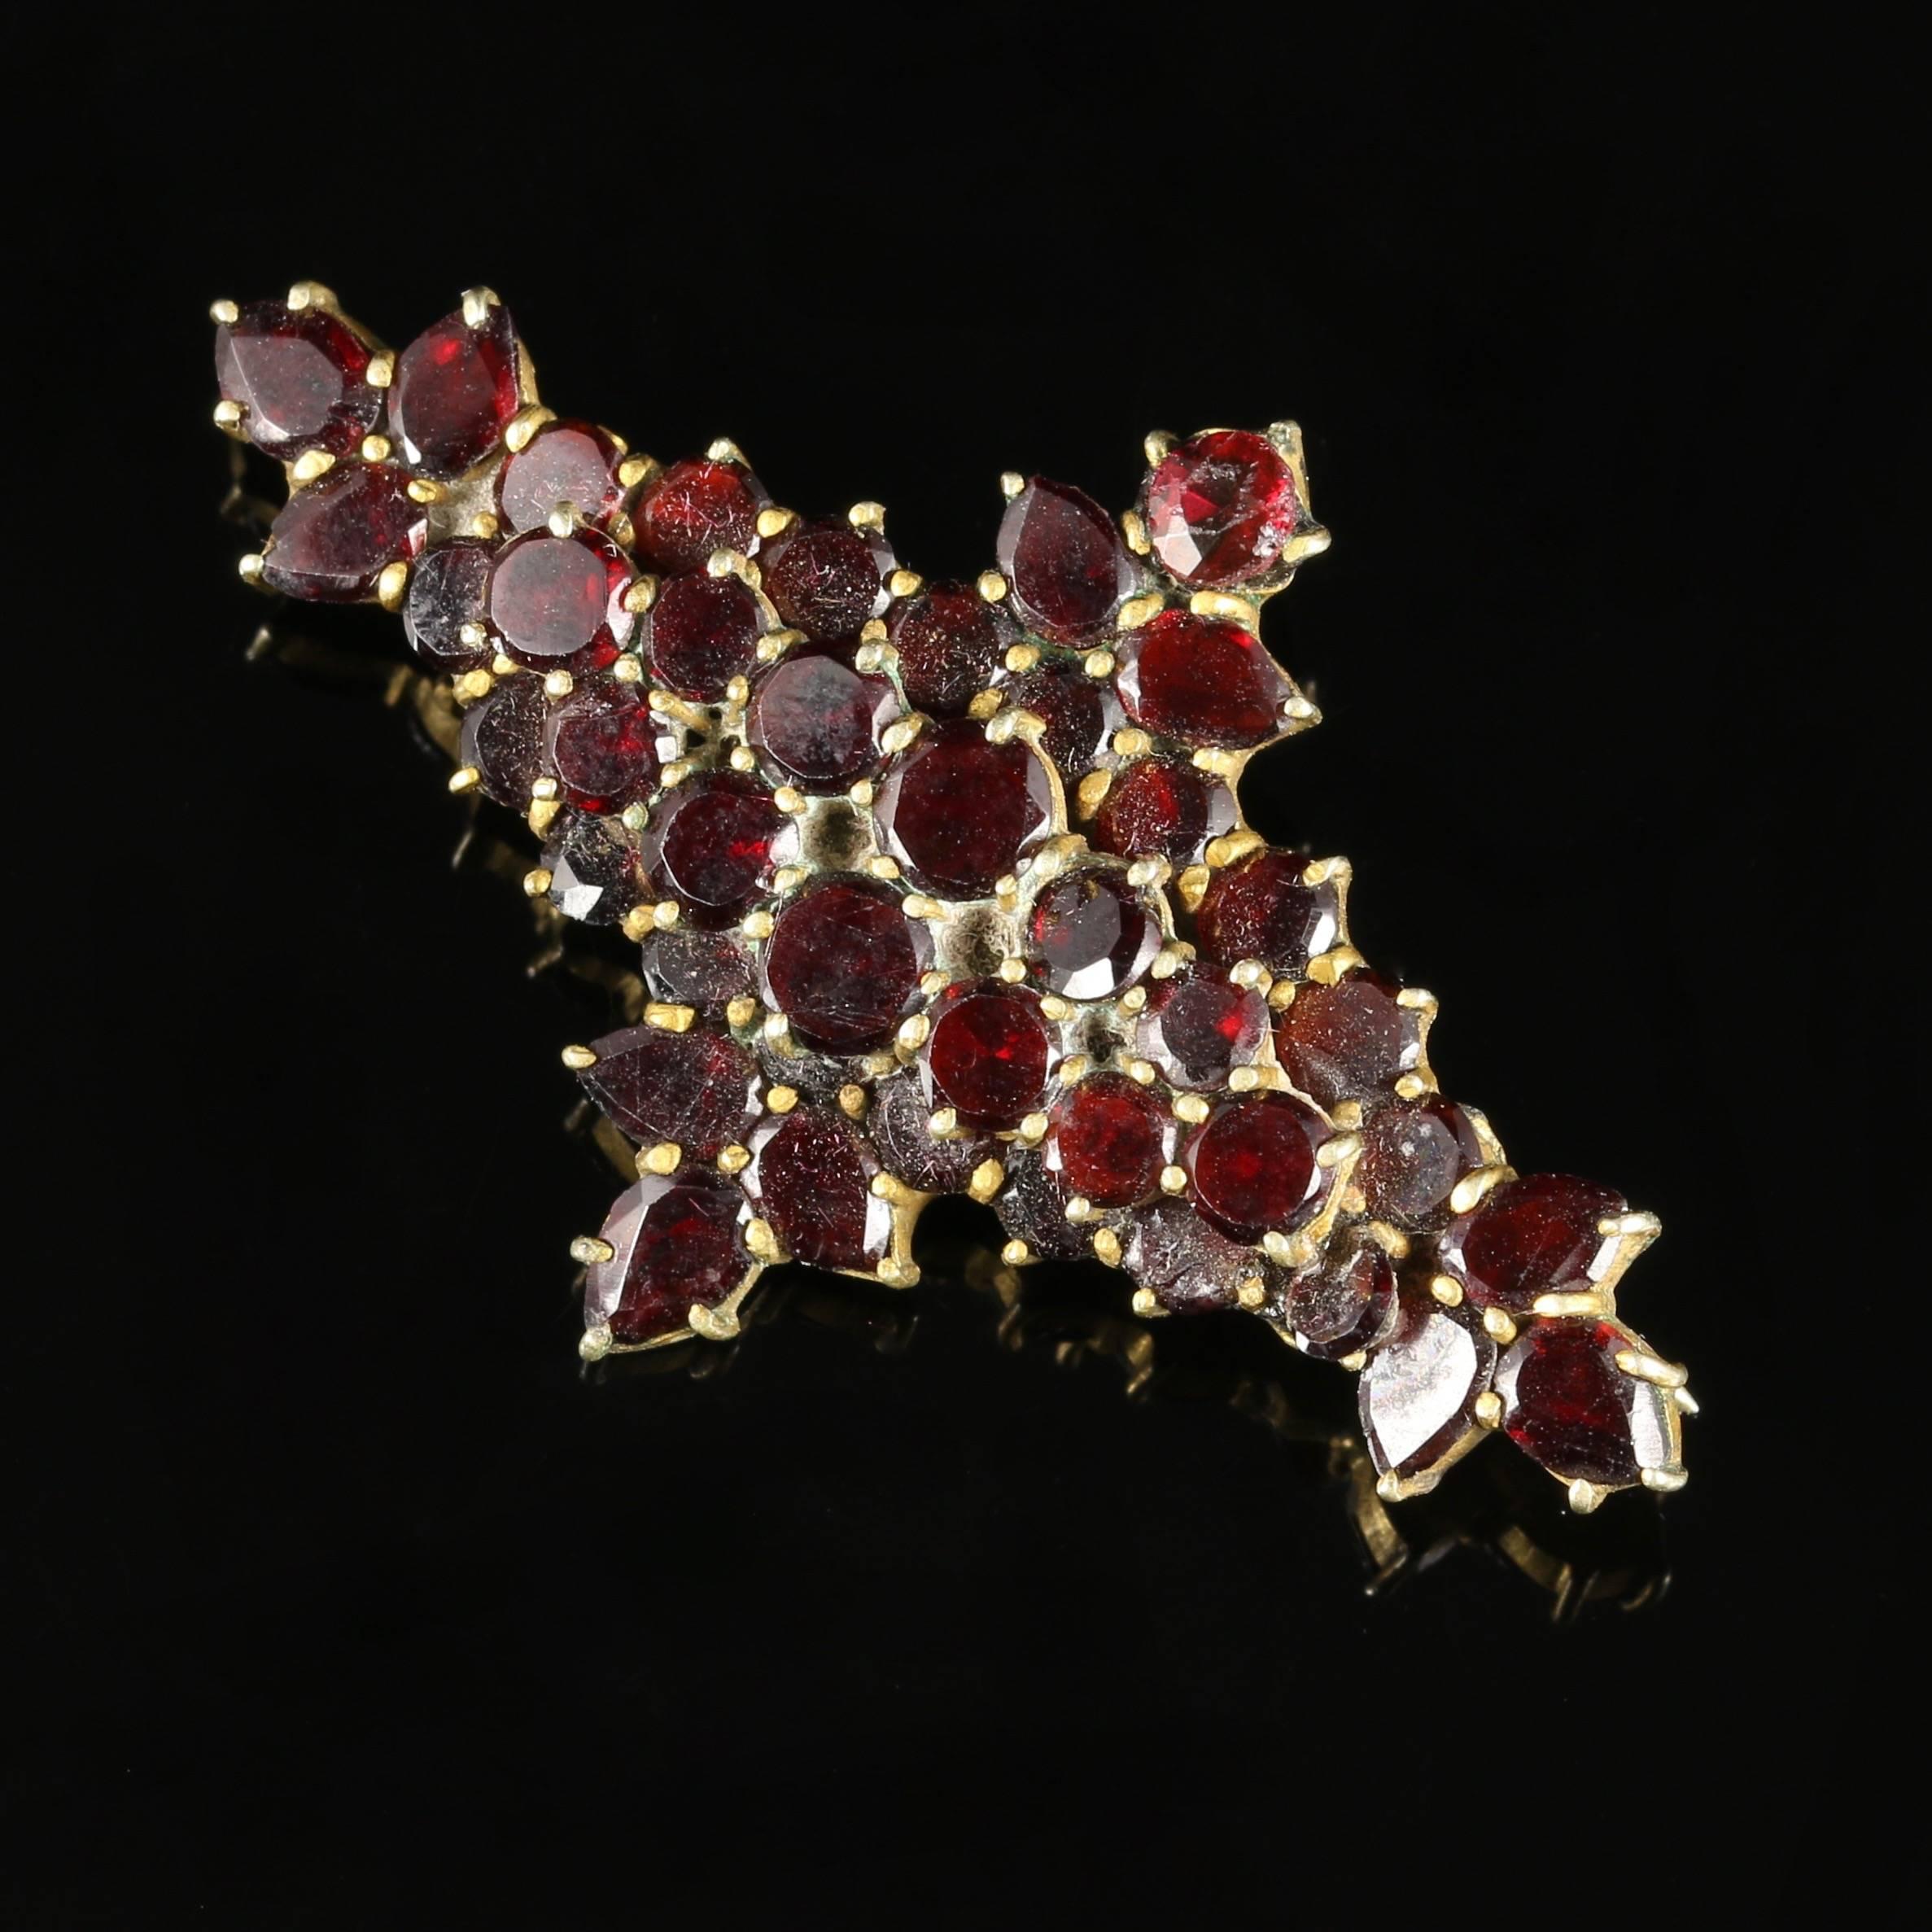 This beautiful antique Victorian Garnet brooch is Circa 1890

The lovely deep red Garnets adorn this fabulous brooch, beautiful workmanship set all round.

The Garnet is a stone of purity and truth as well as a symbol of love and compassion. The